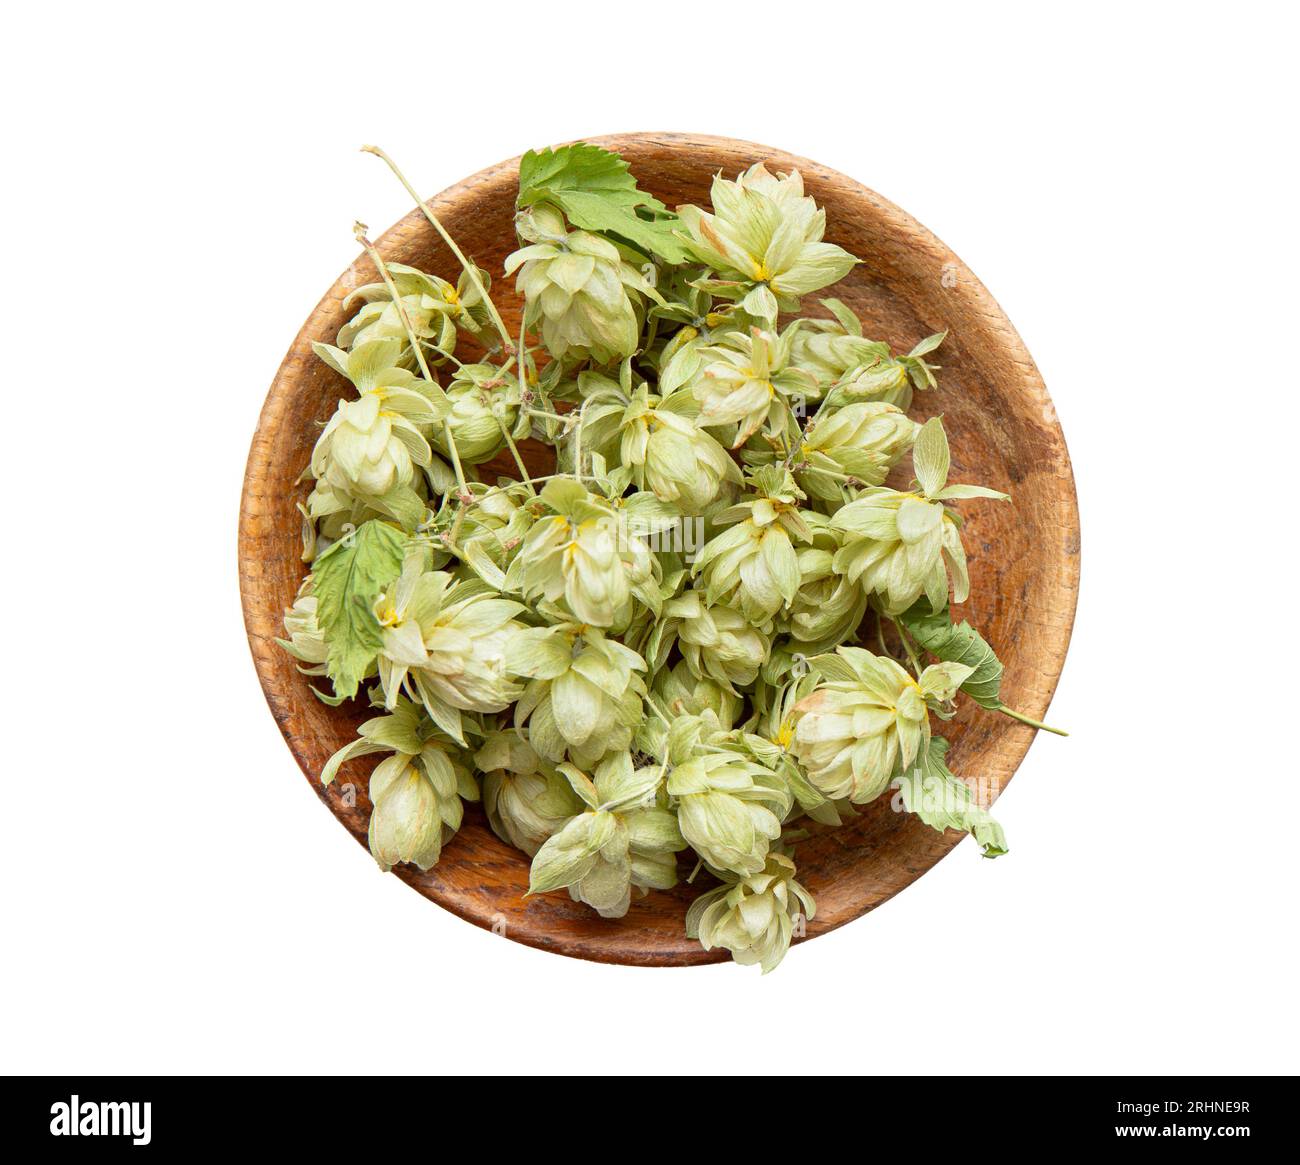 Picked and dried herbal medicinal plant Humulus lupulus, the common hop or hops flowers. Hops flowers in wood bowl isolated on white background. Stock Photo